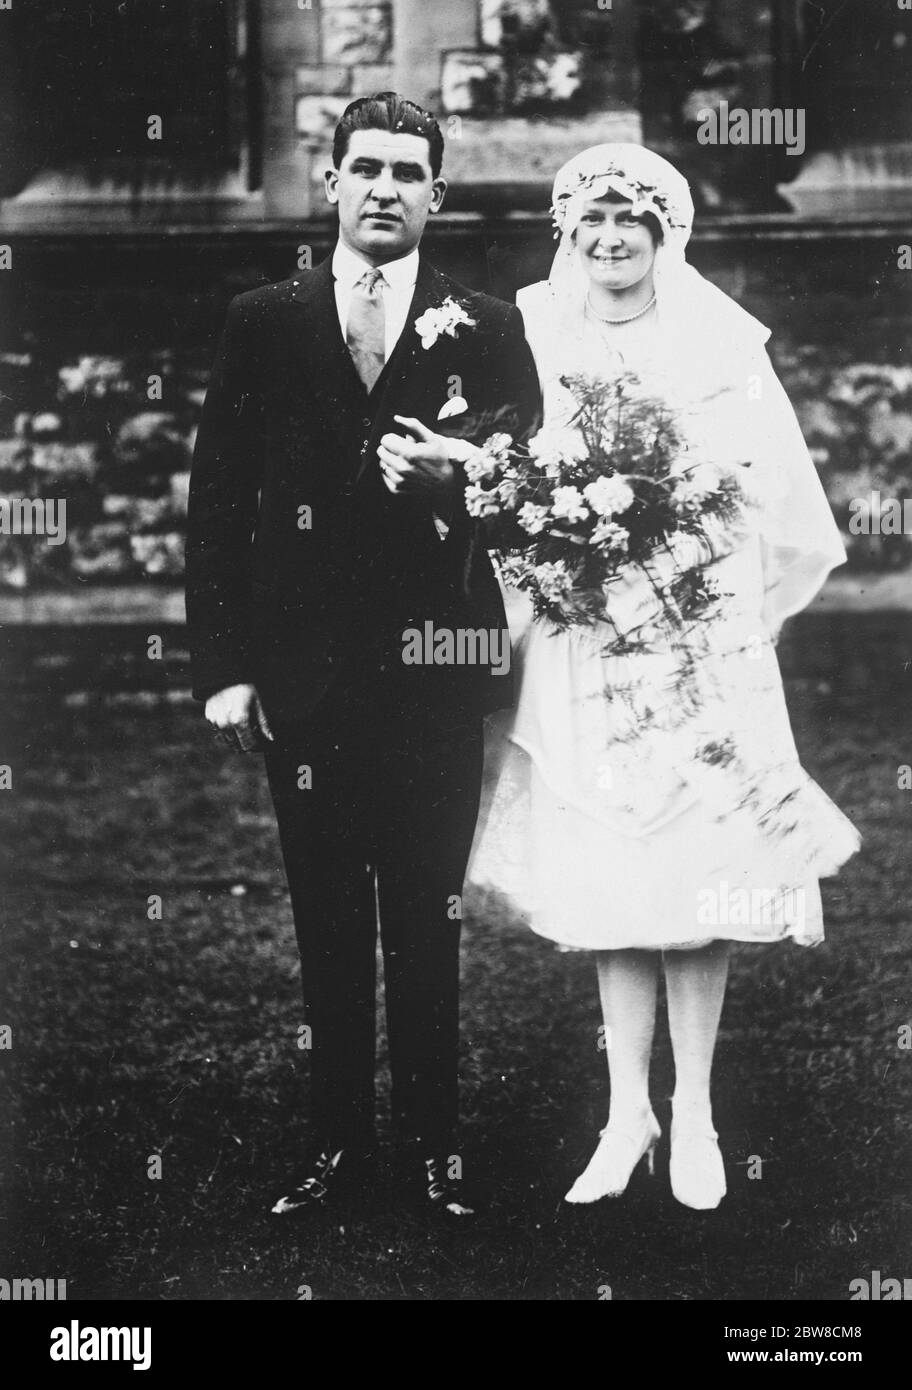 Queen of Norway ' s groom weds . Mr A A Cobb , of Bexley Heath , head groom and outrider to the Queen of Norway , and his bride , Miss S Melton , daughter of the King ' s Farm Bailiff at West Newton , Sandringham . 2 May 1927 Stock Photo